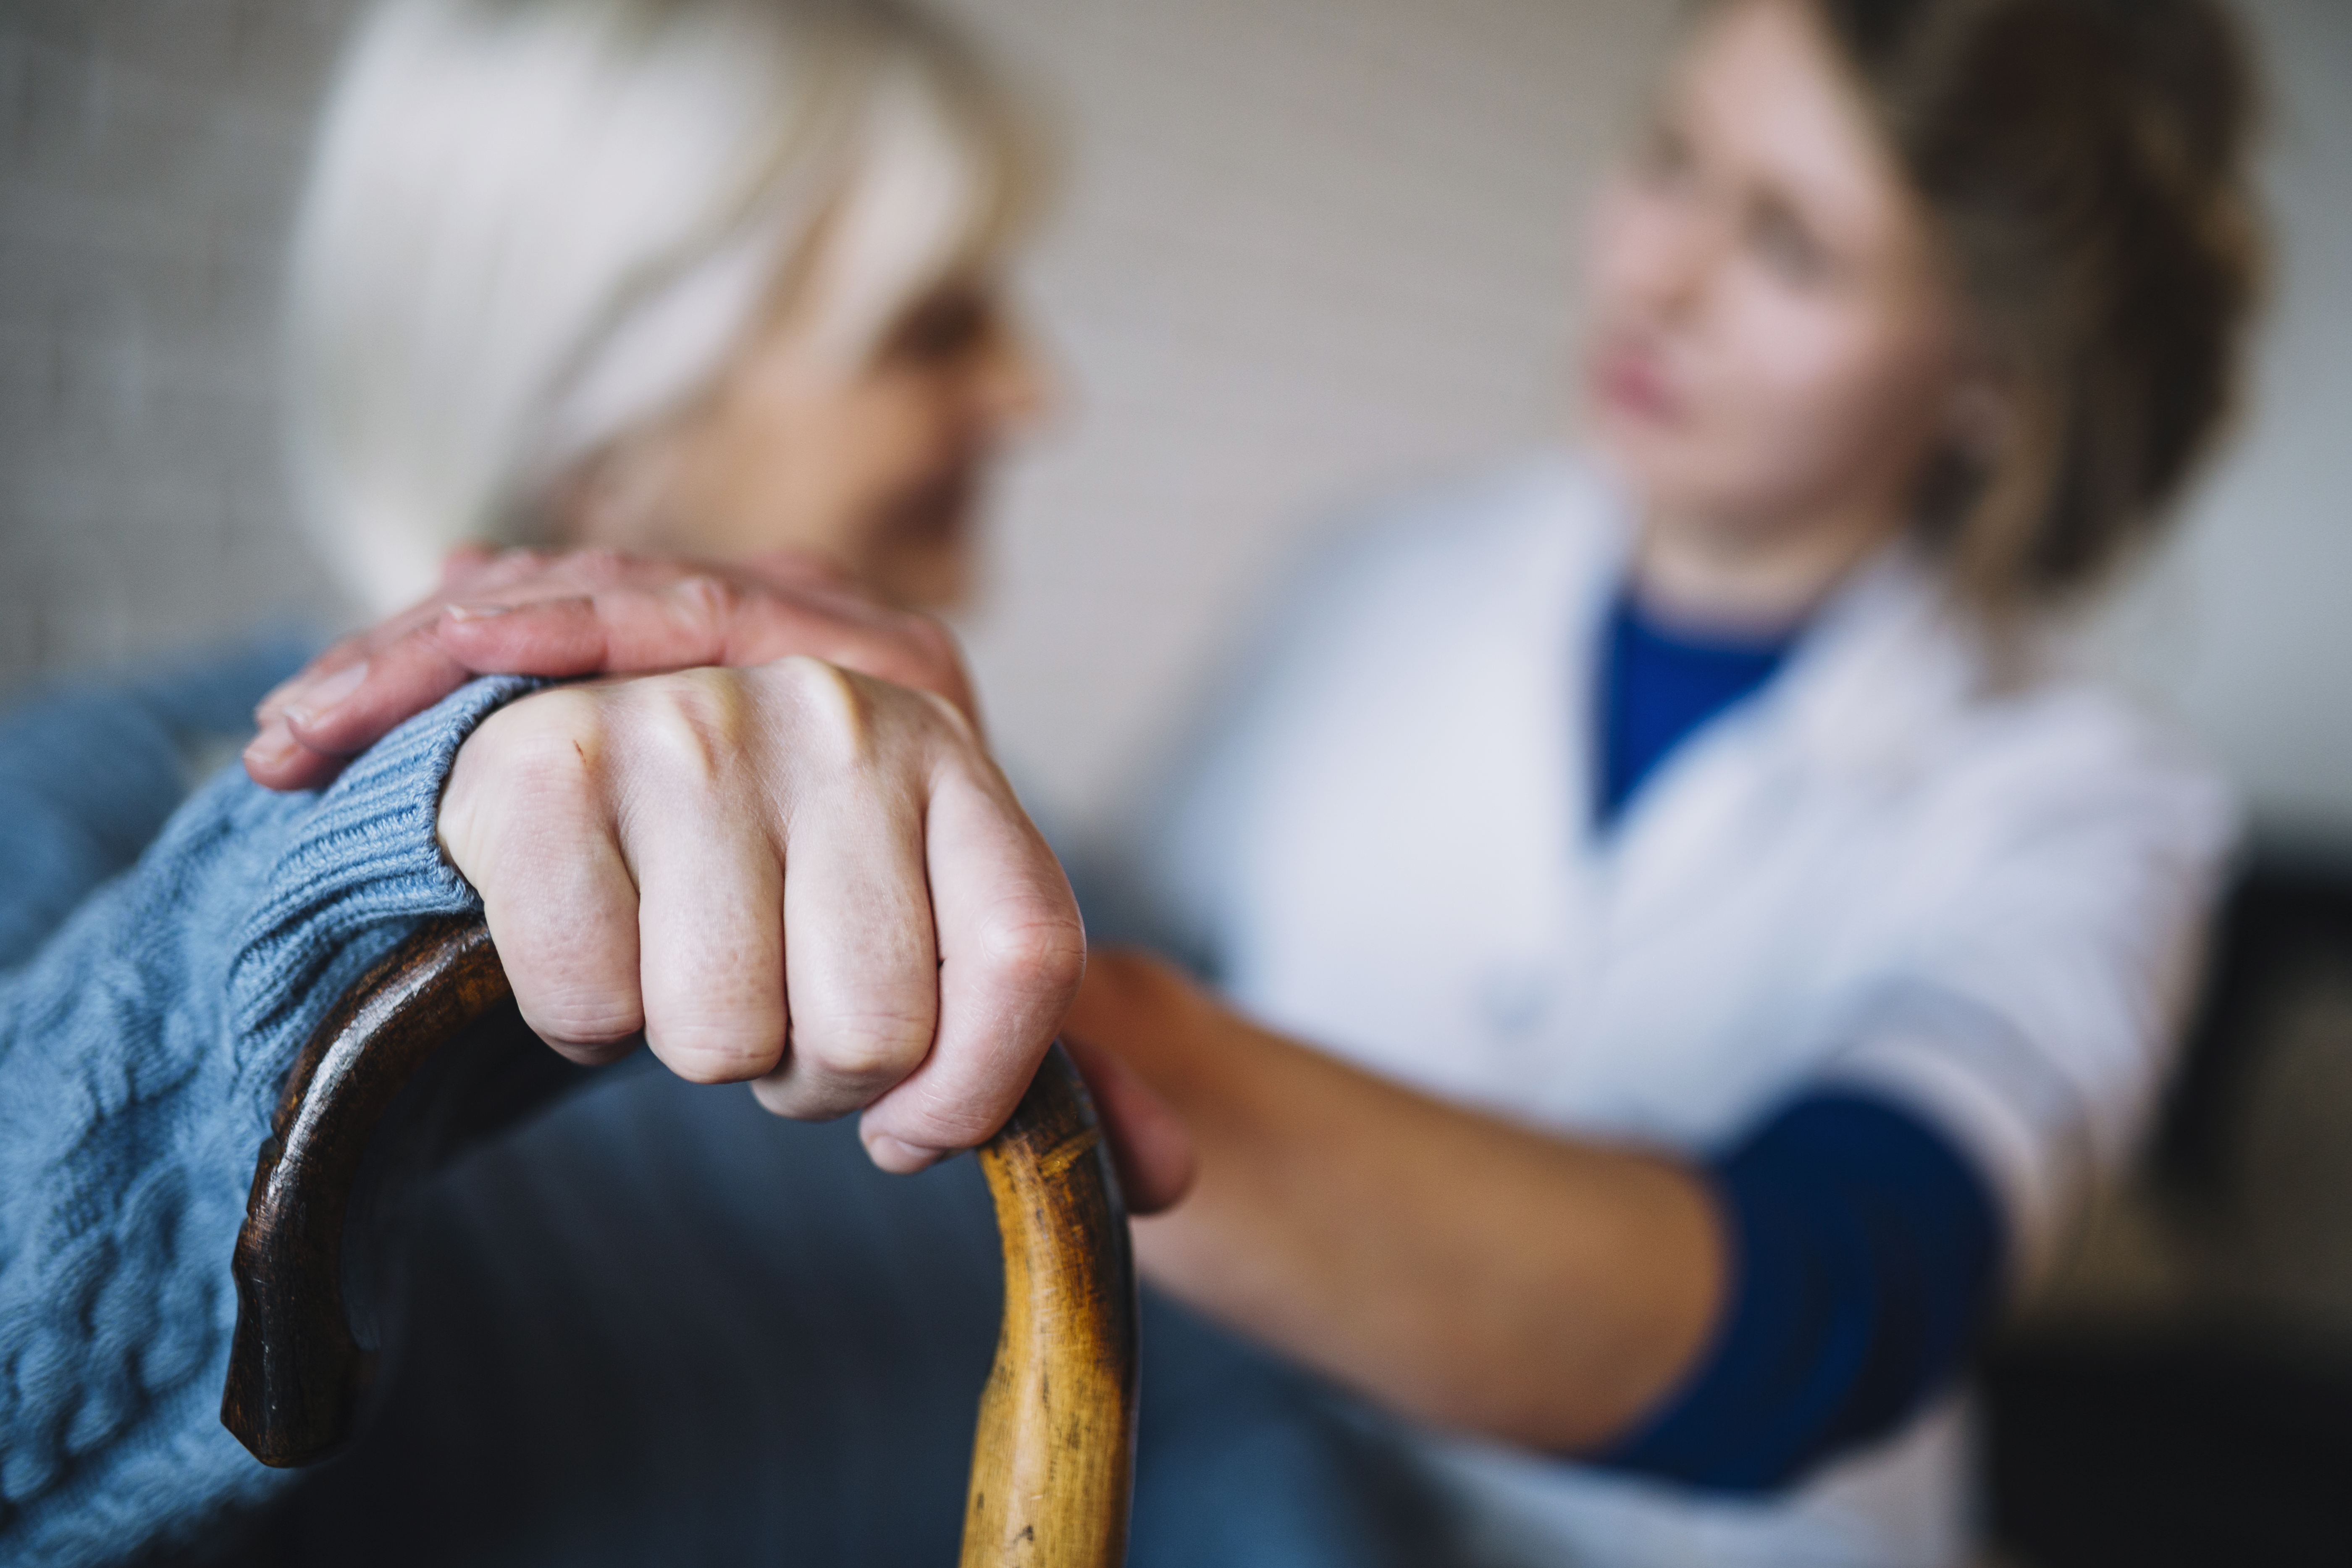 5 SIGNIFICANT REASONS FOR INCLUDING CIVILITY IN NURSING